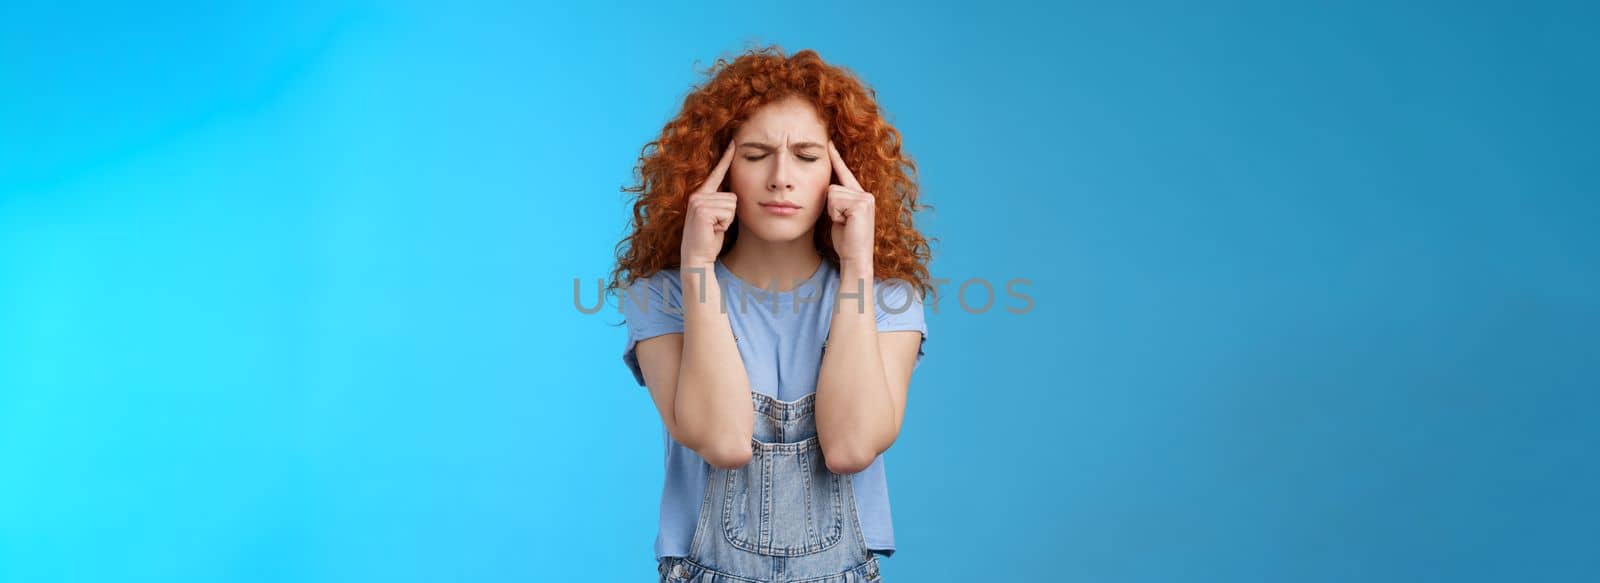 Come on girl think. Perplexed distressed concerned intense redhead curly woman close eyes frowning touch temples suffer migraine painful headache cannot concentrate blue background. Copy space